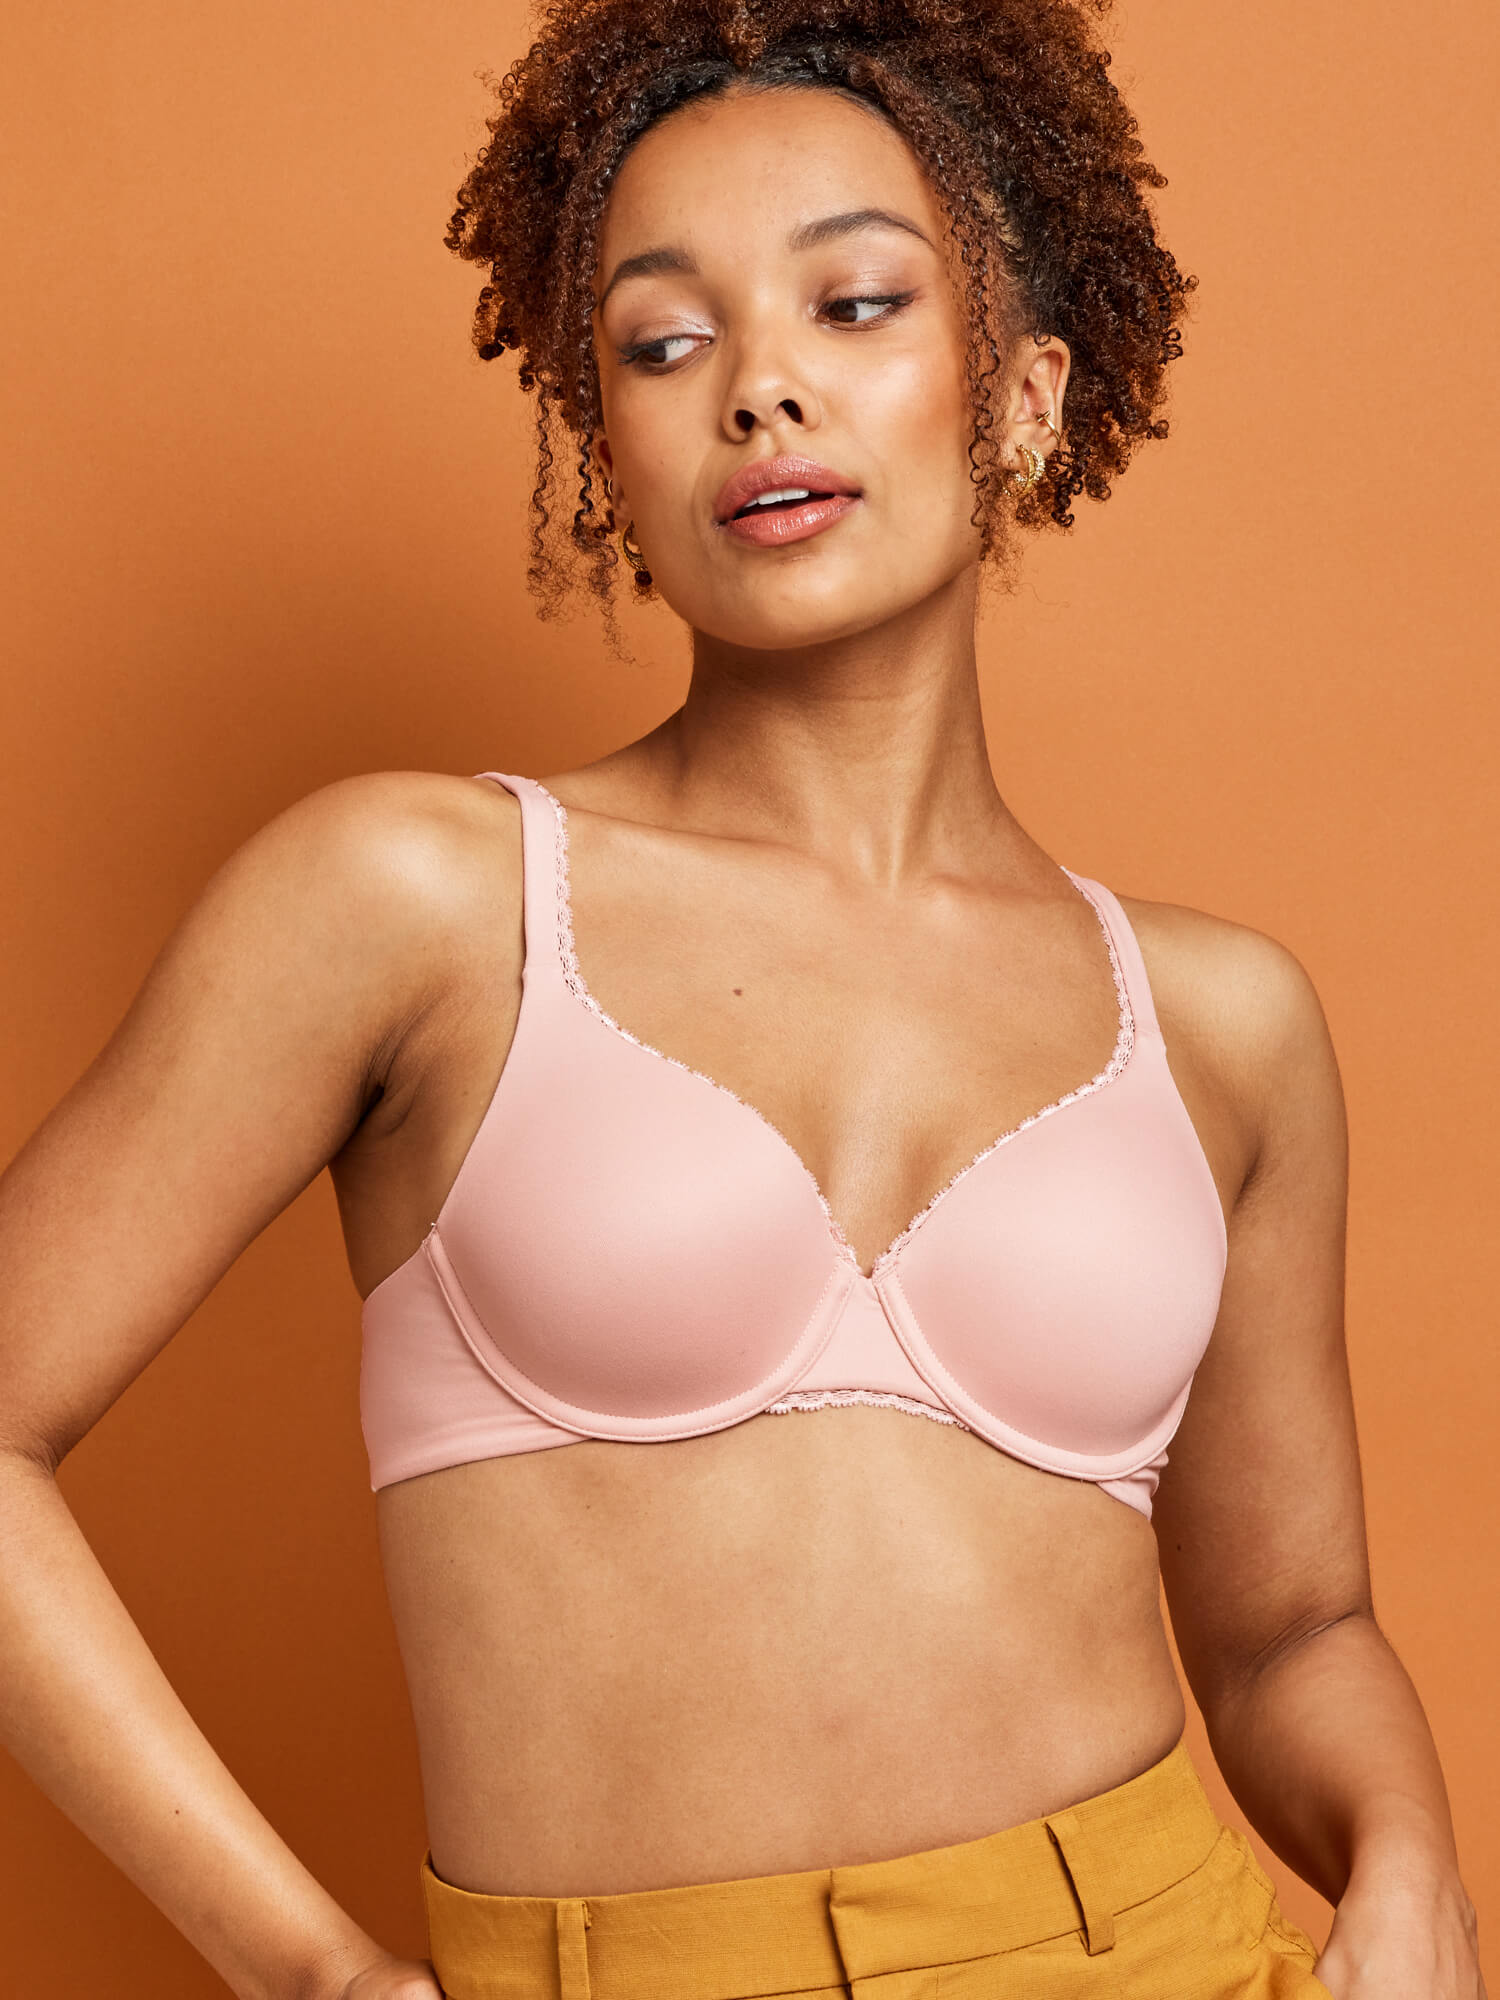 Buy TULIE (B) PEACH solid color full-coverage T Shirt bra for